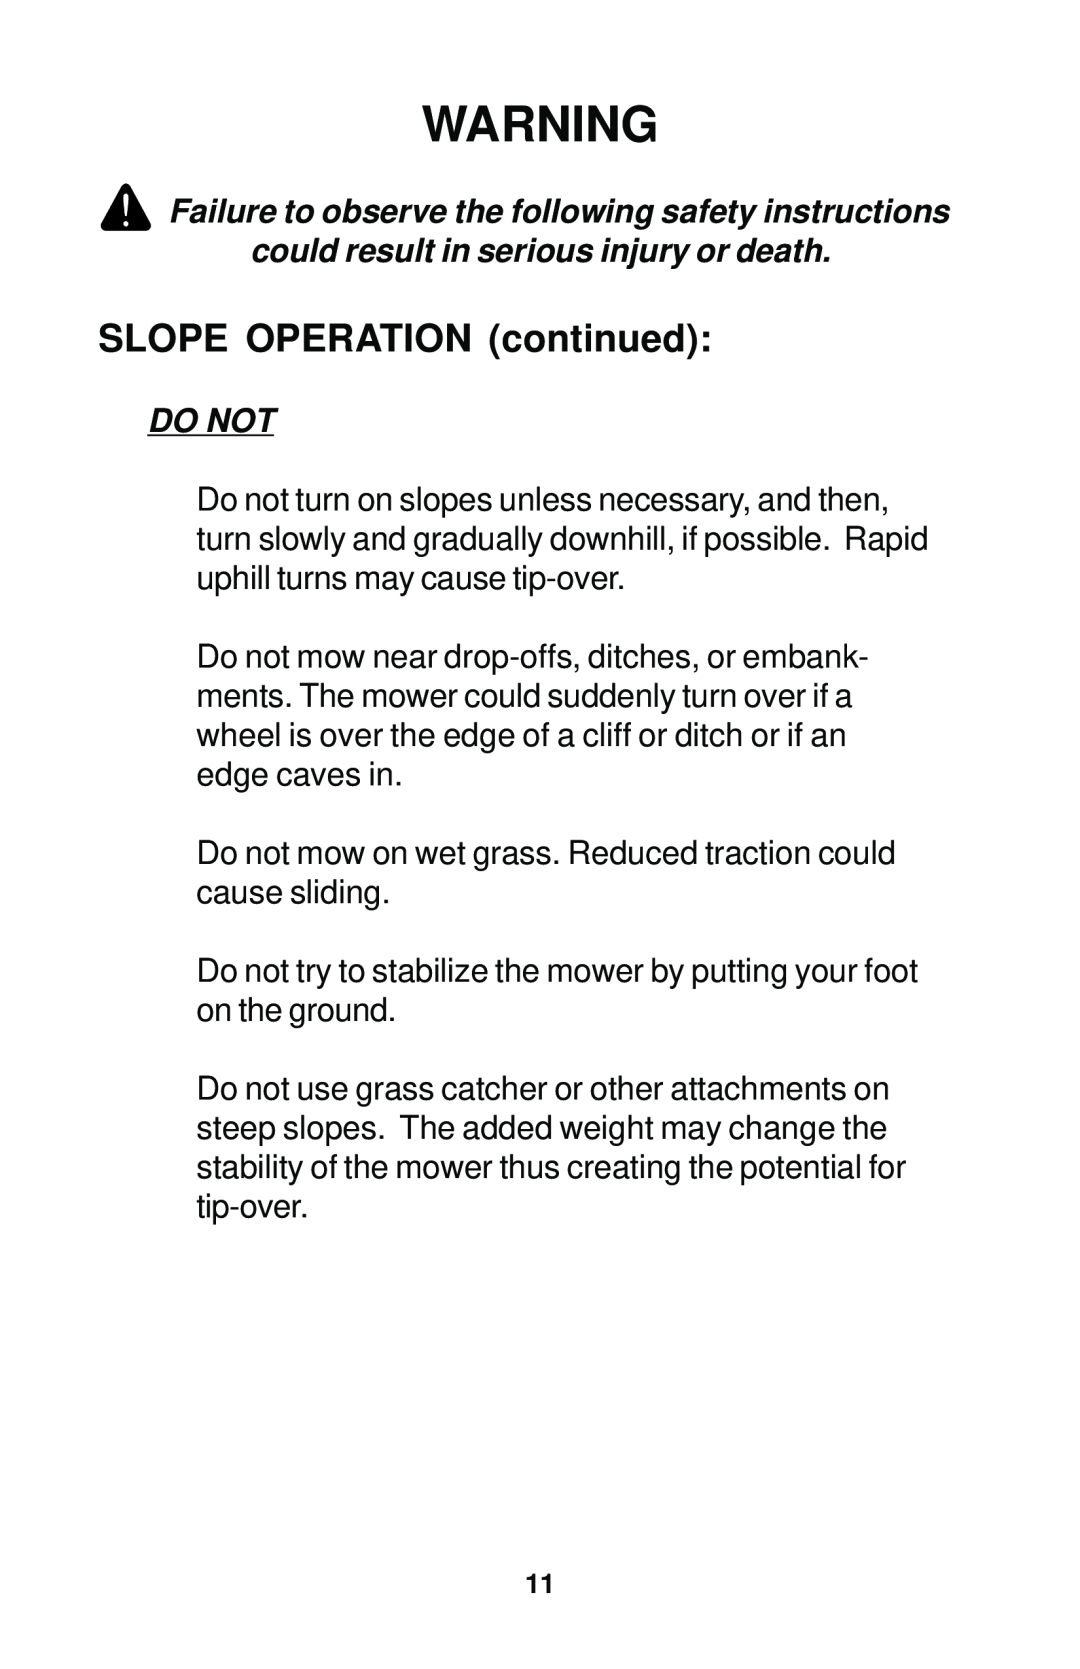 Dixon 42, 44, 50, 44 MAG, 50 MAG SLOPE OPERATION continued, Do not mow on wet grass. Reduced traction could cause sliding 